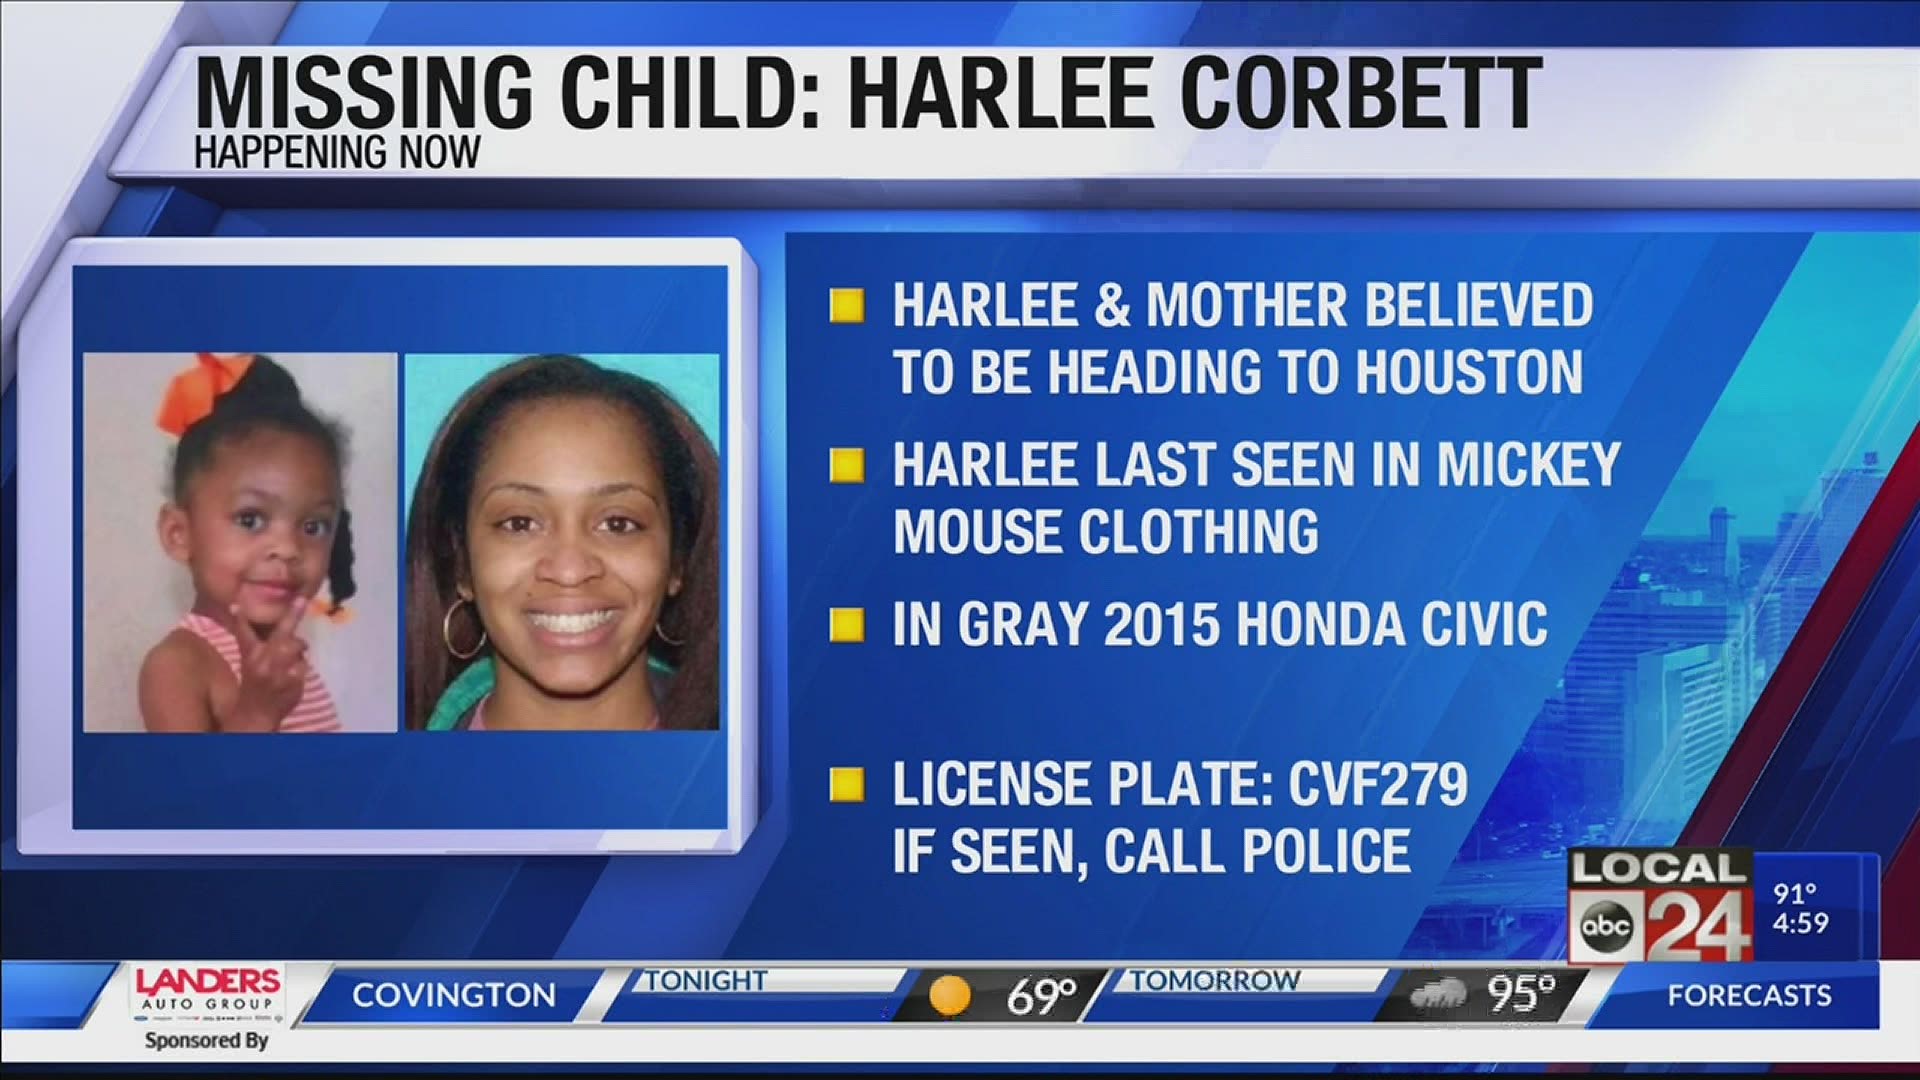 City Watch Alert issued for missing child, possibly headed toward Texas.